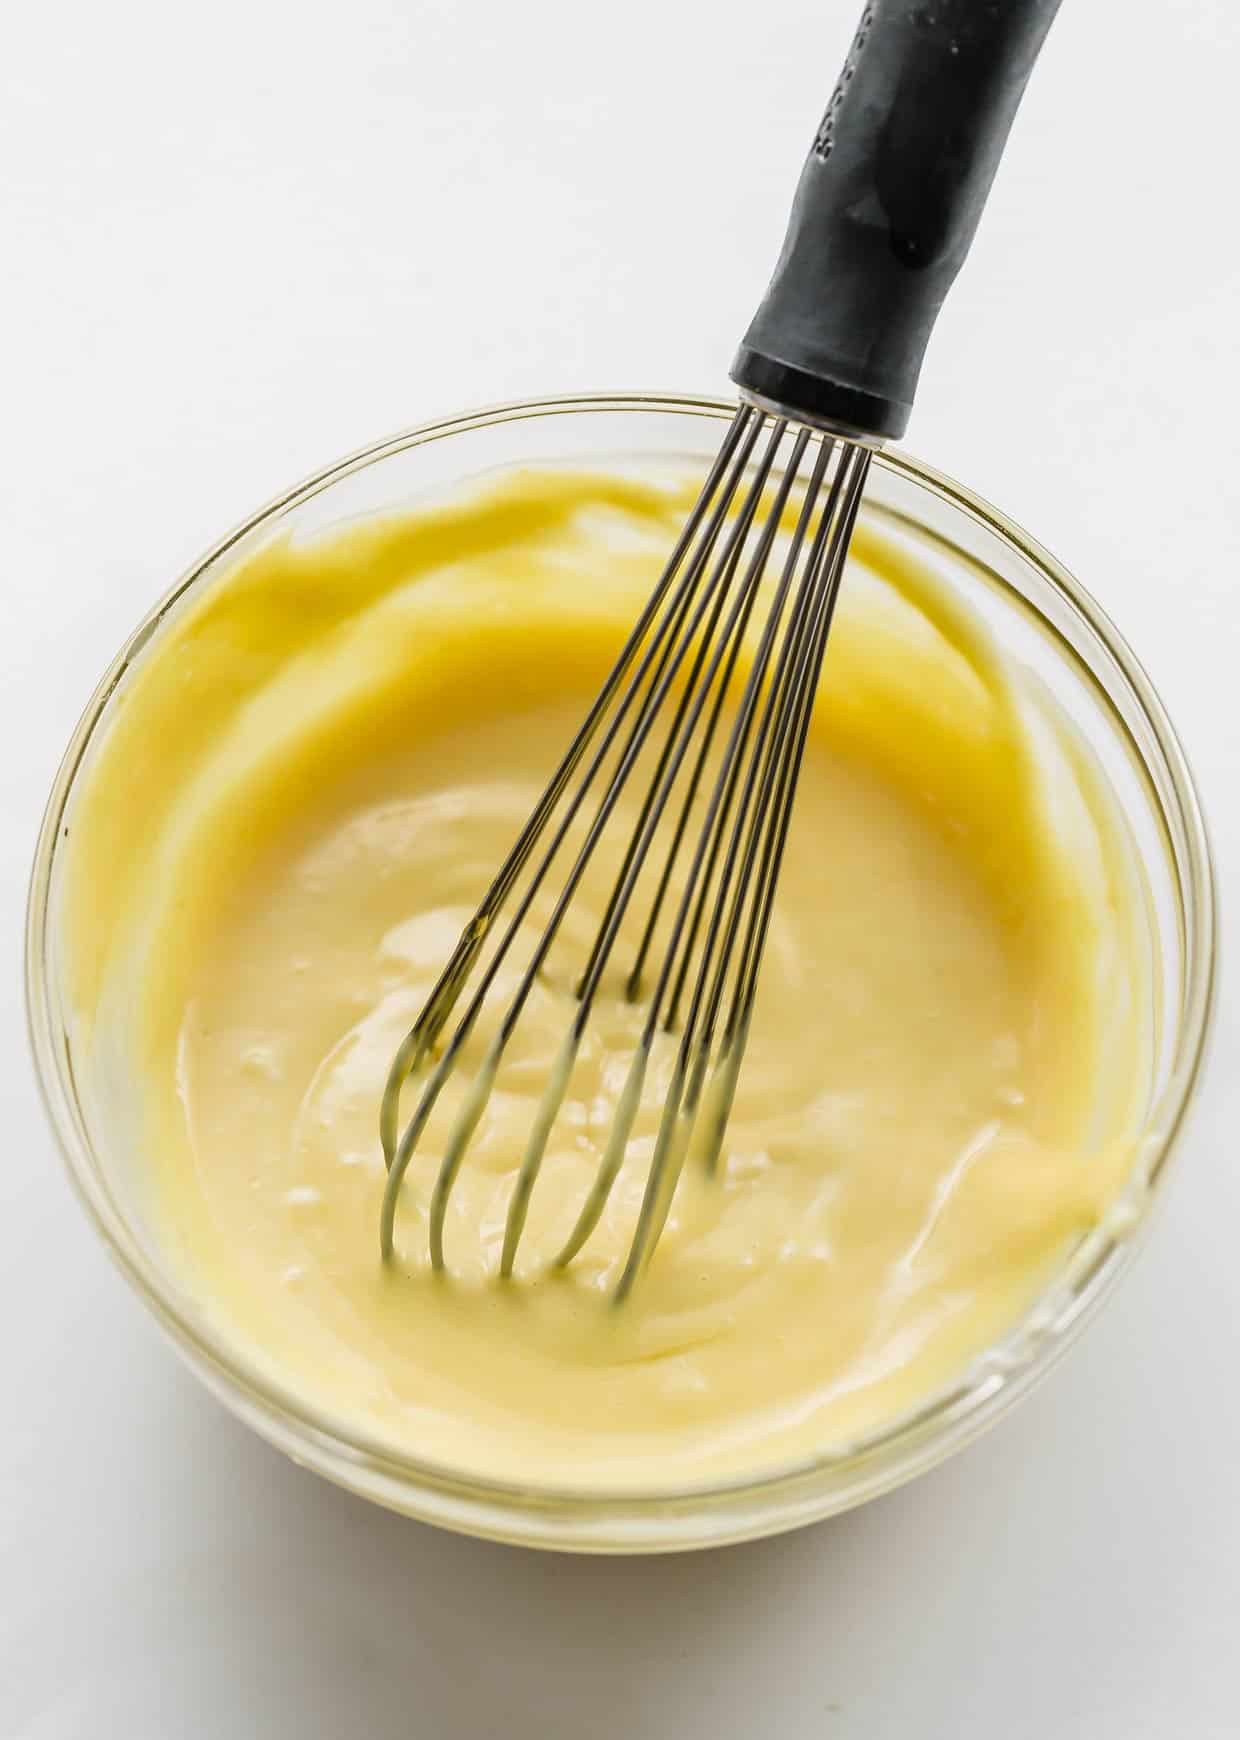 Homemade honey mustard in a glass bowl on a white background.